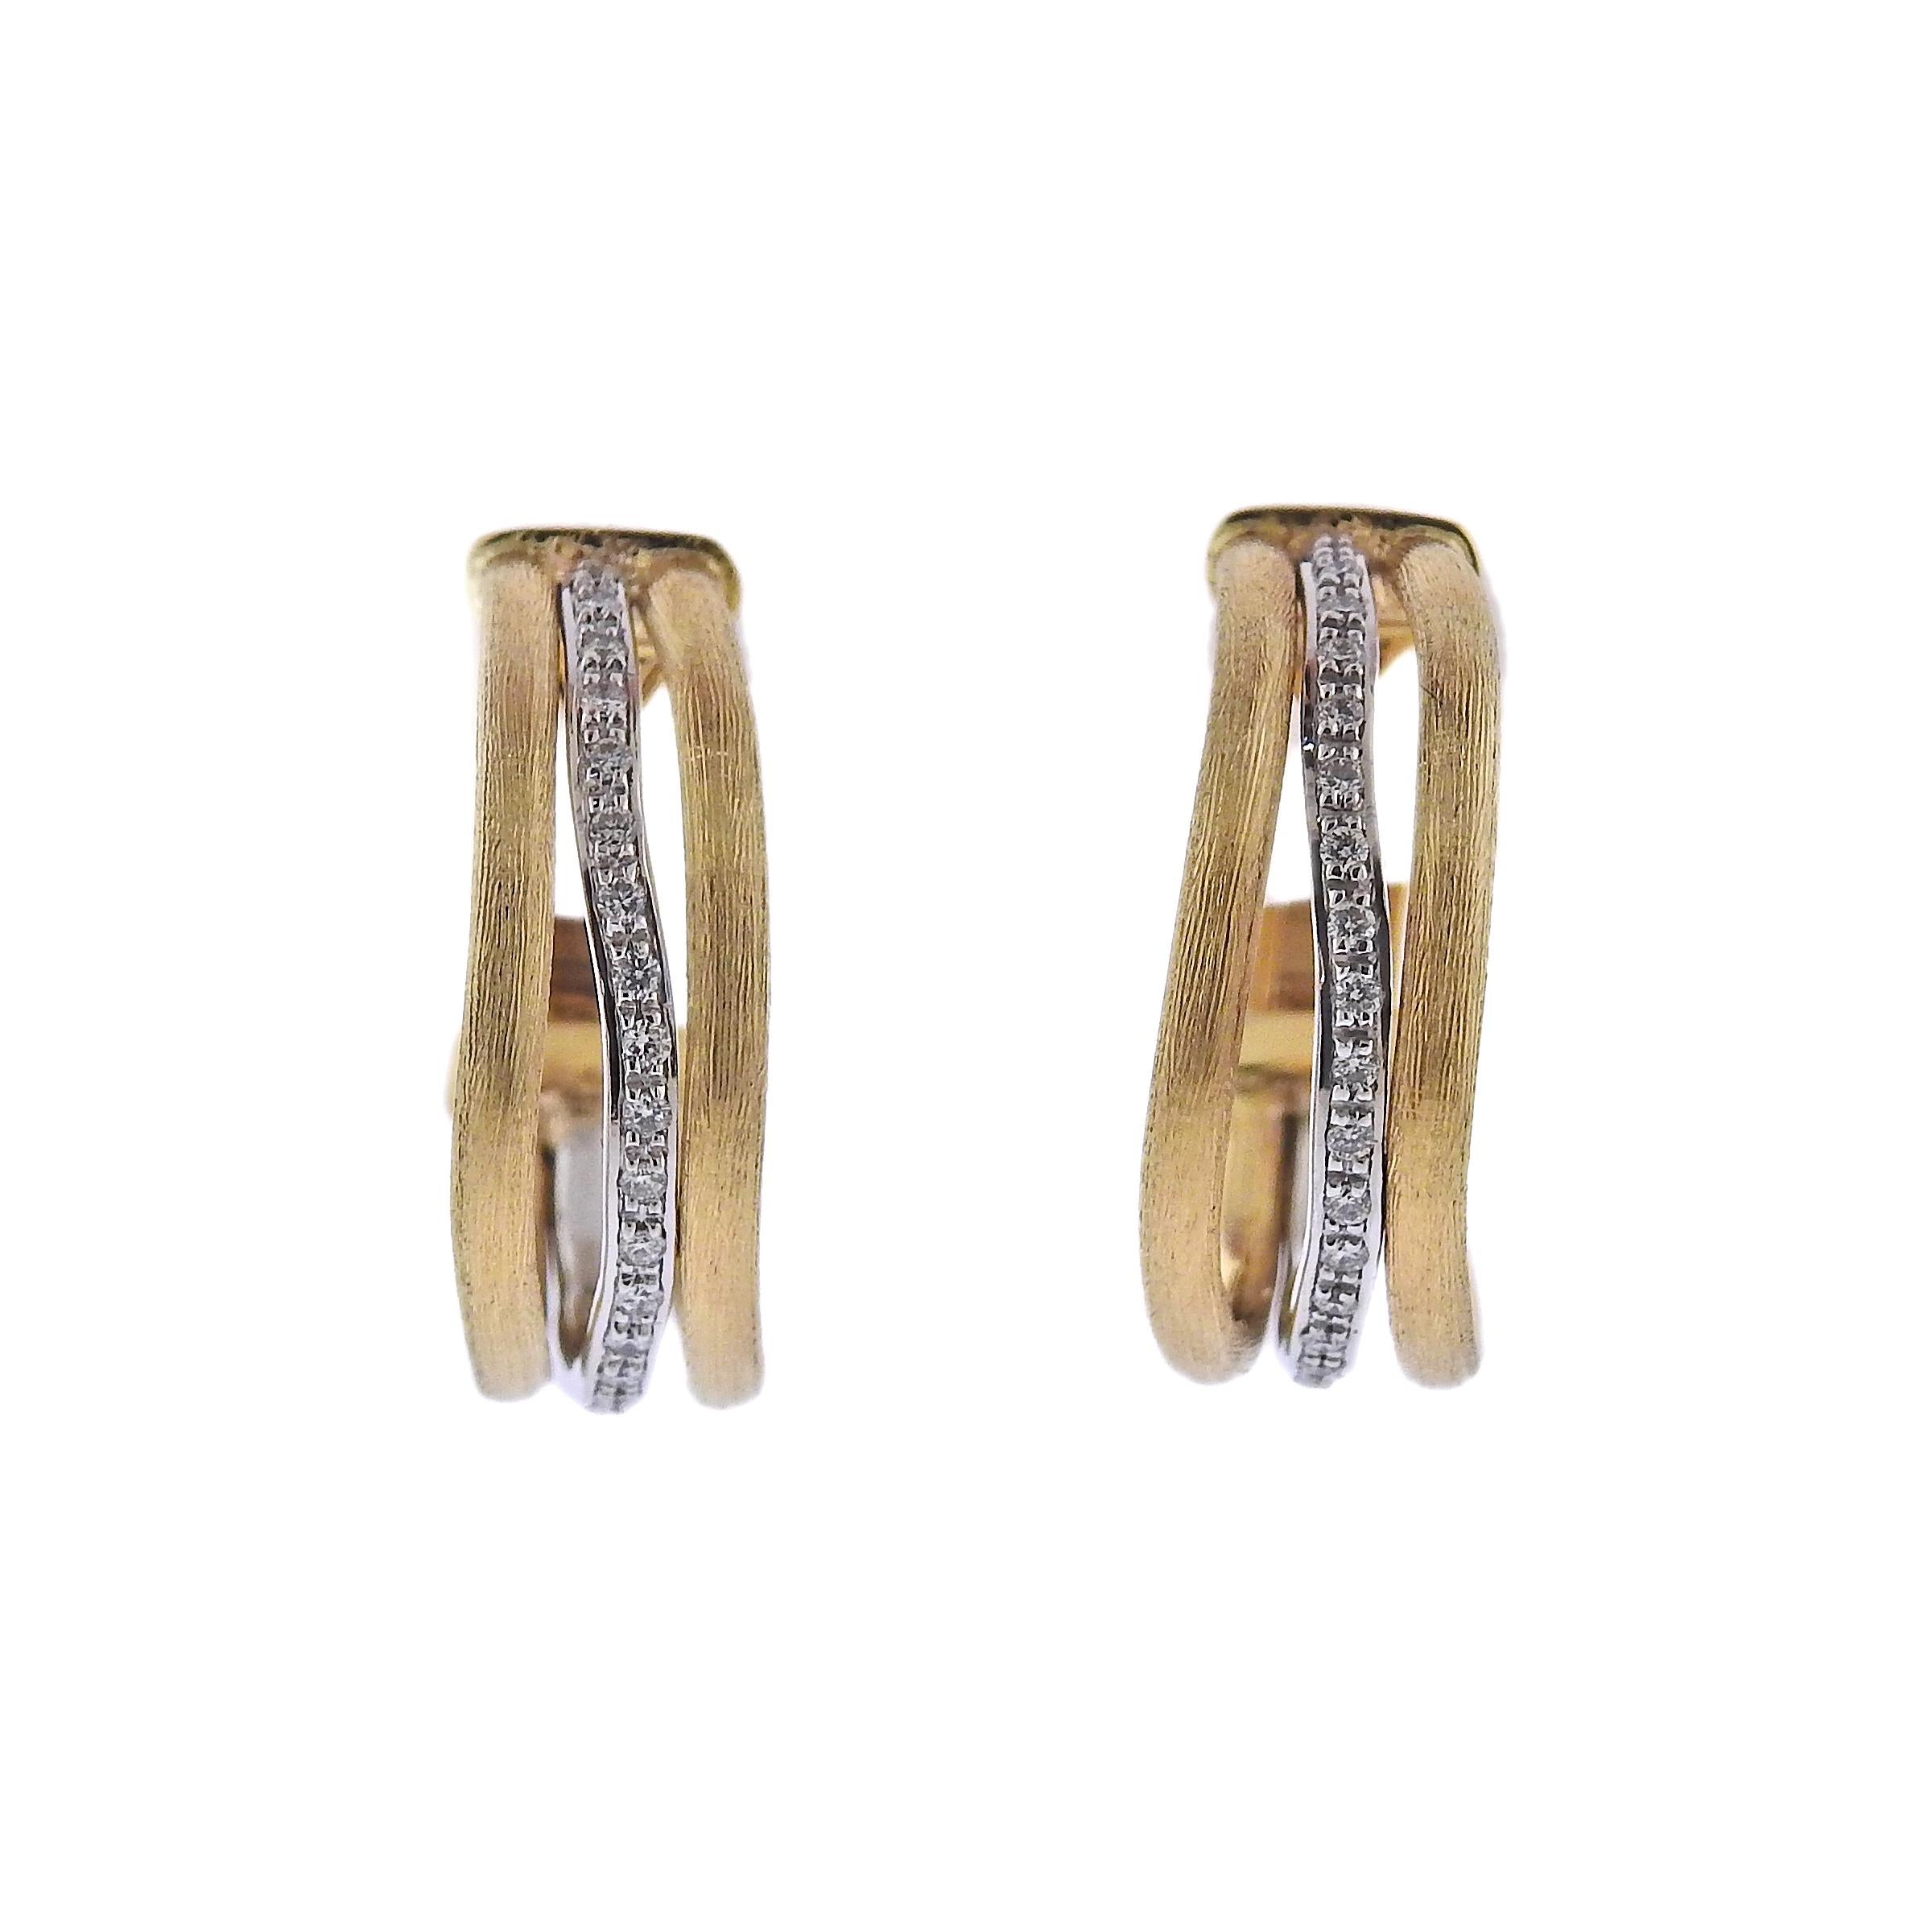 Marco Bicego Jaipur collection 18K yellow and white gold hoop earrings set with 0.25ctw of VS/G-H diamonds. Earrings measure 20mm in diameter and 8mm at the widest point. Mareked: Marco Bicego, Made in Italy, 750. Weight is 10.9 grams. Retail Value